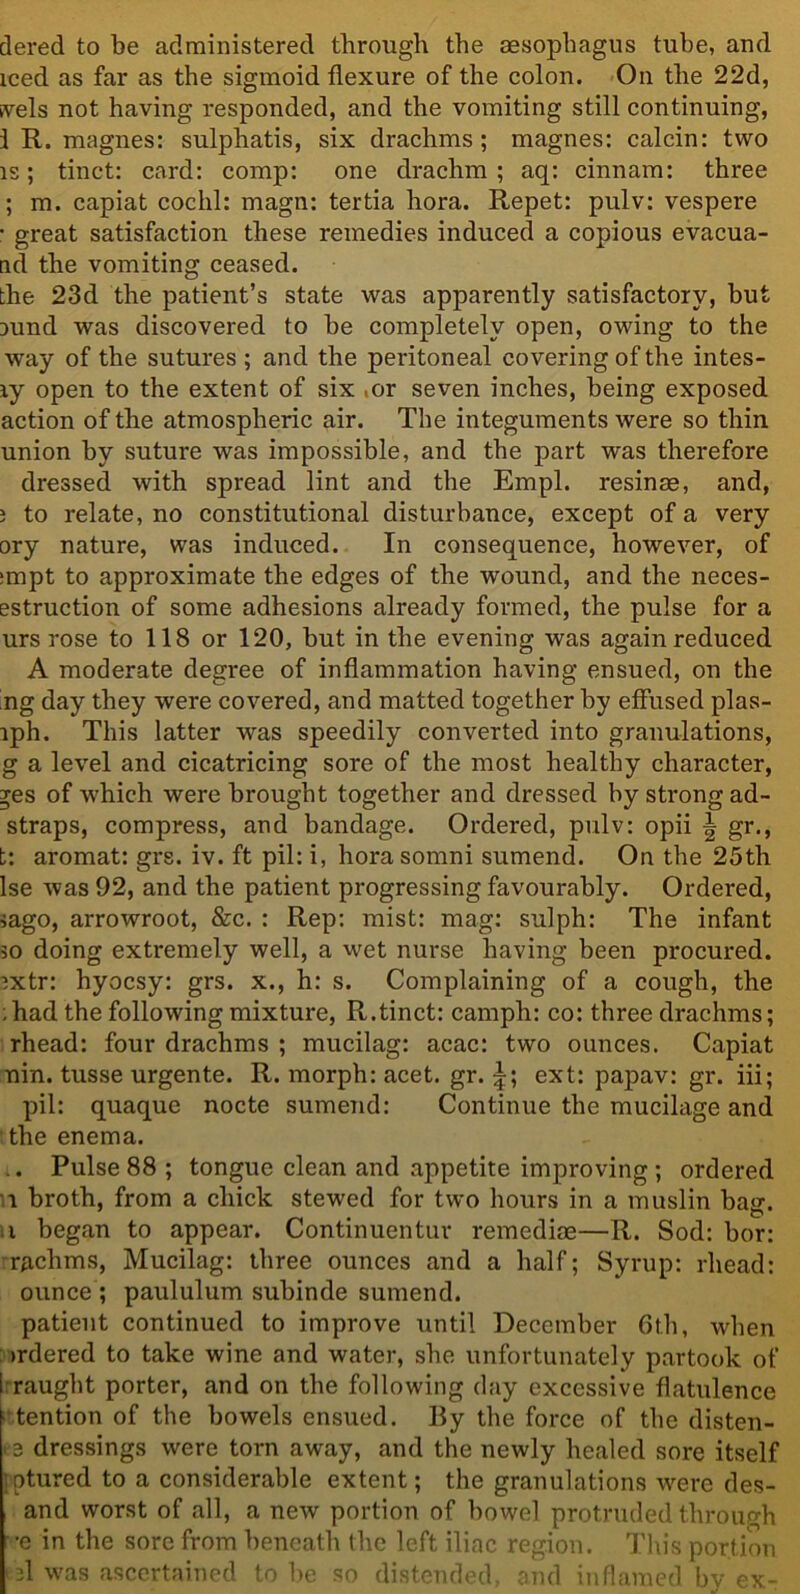 dered to be administered through the sesophagus tube, and iced as far as the sigmoid flexure of the colon. On the 22d, svels not having responded, and the vomiting still continuing, 1 R. magnes: sulphatis, six drachms; magnes: calcin: two is; tinct: card: comp: one drachm ; aq: cinnam: three ; m. capiat coclil: magn: tertia hora. Repet: pulv: vespere • great satisfaction these remedies induced a copious evacua- nd the vomiting ceased. the 23d the patient’s state was apparently satisfactory, but rund was discovered to be completely open, owing to the way of the sutures ; and the peritoneal covering of the intes- ry open to the extent of six ,or seven inches, being exposed action of the atmospheric air. The integuments were so thin union by suture was impossible, and the part was therefore dressed with spread lint and the Empl. resinas, and, ; to relate, no constitutional disturbance, except of a very ory nature, was induced. In consequence, however, of :mpt to approximate the edges of the wound, and the neces- estruction of some adhesions already formed, the pulse for a urs rose to 118 or 120, but in the evening was again reduced A moderate degree of inflammation having ensued, on the 'ng day they were covered, and matted together by effused plas- iph. This latter was speedily converted into granulations, g a level and cicatricing sore of the most healthy character, ges of which were brought together and dressed by strong ad- straps, compress, and bandage. Ordered, pulv: opii \ gr., t: aromat: grs. iv. ft pil: i, horasomni sumend. On the 25th Ise was 92, and the patient progressing favourably. Ordered, iago, arrowroot, &c. : Rep: mist: mag: sulph: The infant so doing extremely well, a wet nurse having been procured. ?xtr: hyocsy: grs. x., h: s. Complaining of a cough, the ; had the following mixture, R.tinct: camph: co: three drachms; rhead: four drachms ; mucilag: acac: two ounces. Capiat nin. tusse urgente. R. morph: acet. gr. \\ ext: papav: gr. iii; pil: quaque nocte sumend: Continue the mucilage and the enema. .. Pulse 88 ; tongue clean and appetite improving ; ordered i broth, from a chick stewed for two hours in a muslin bag. ■ x began to appear. Continuentuv remediae—R. Sod: bor: rachms, Mucilag: three ounces and a half; Syrup: rhead: ounce ; paululum subinde sumend. patient continued to improve until December 6th, when >rdered to take wine and water, she unfortunately partook of i raught porter, and on the following day excessive flatulence tention of the bowels ensued. By the force of the disten- . 3 dressings were torn away, and the newly healed sore itself iptured to a considerable extent; the granulations were des- and worst of all, a new portion of bowel protruded through •e in the sore from beneath the left iliac region. This portion d was ascertained to be so distended, and inflamed by ex-